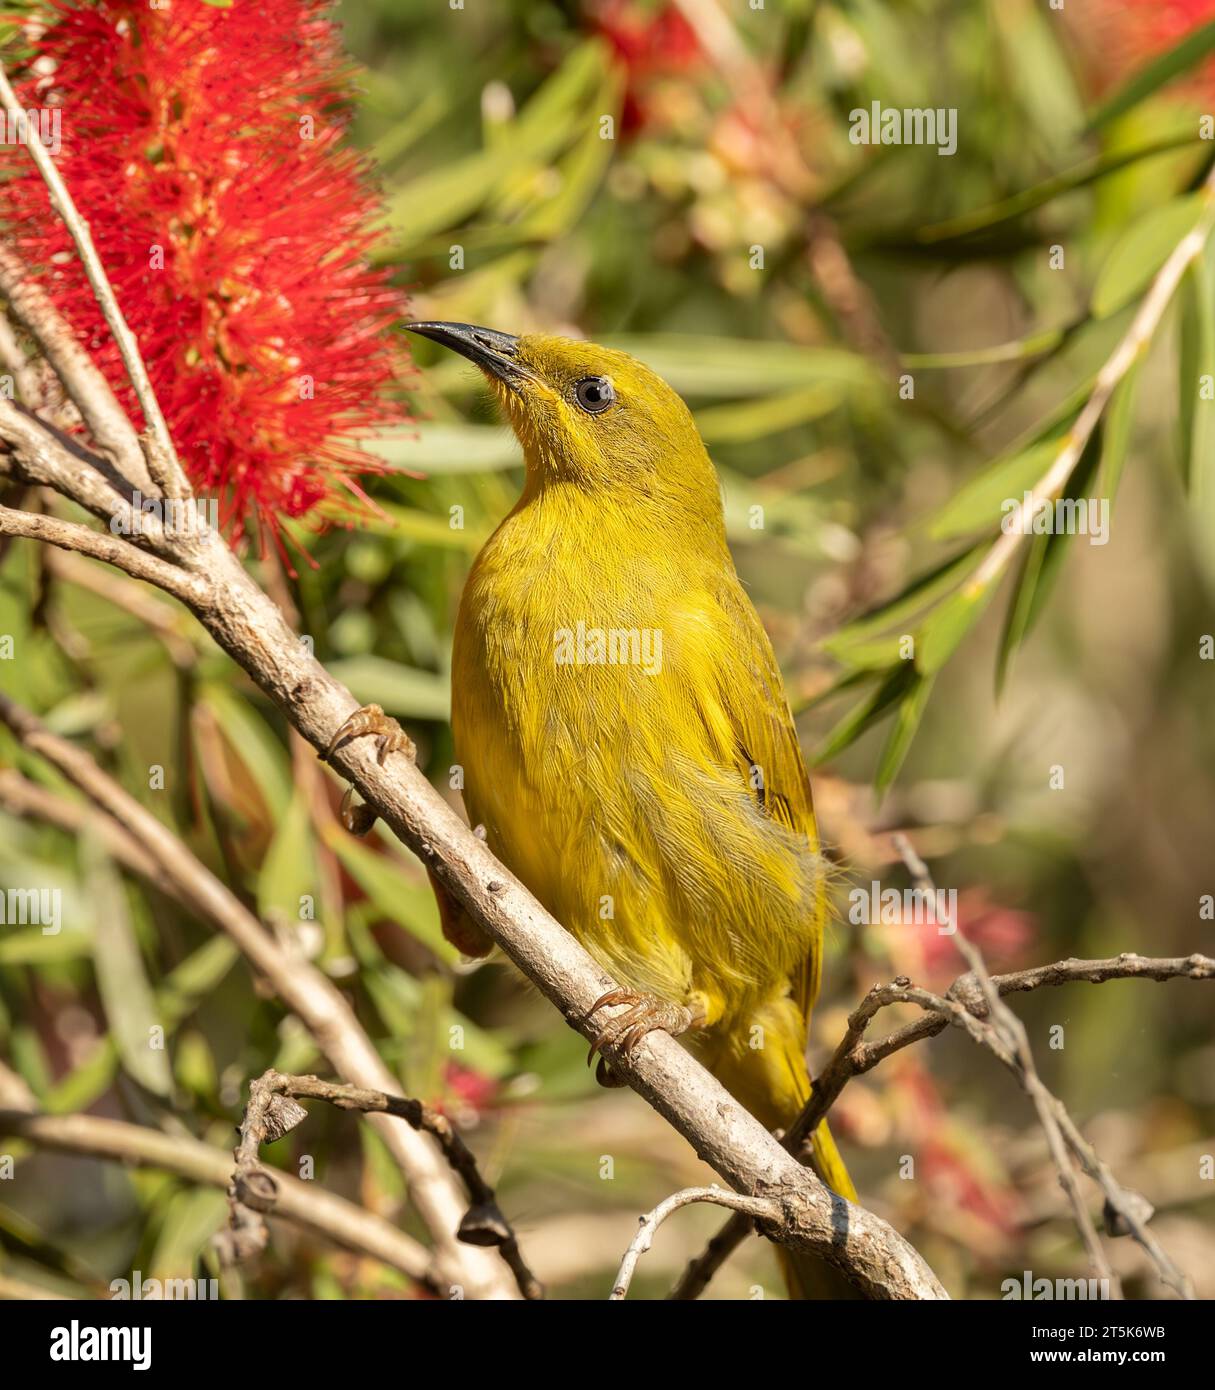 The yellow honeyeater (Stomiopera flava ) is a species of bird in the family Meliphagidae, typify the tropics. In north-east Queensland. Stock Photo